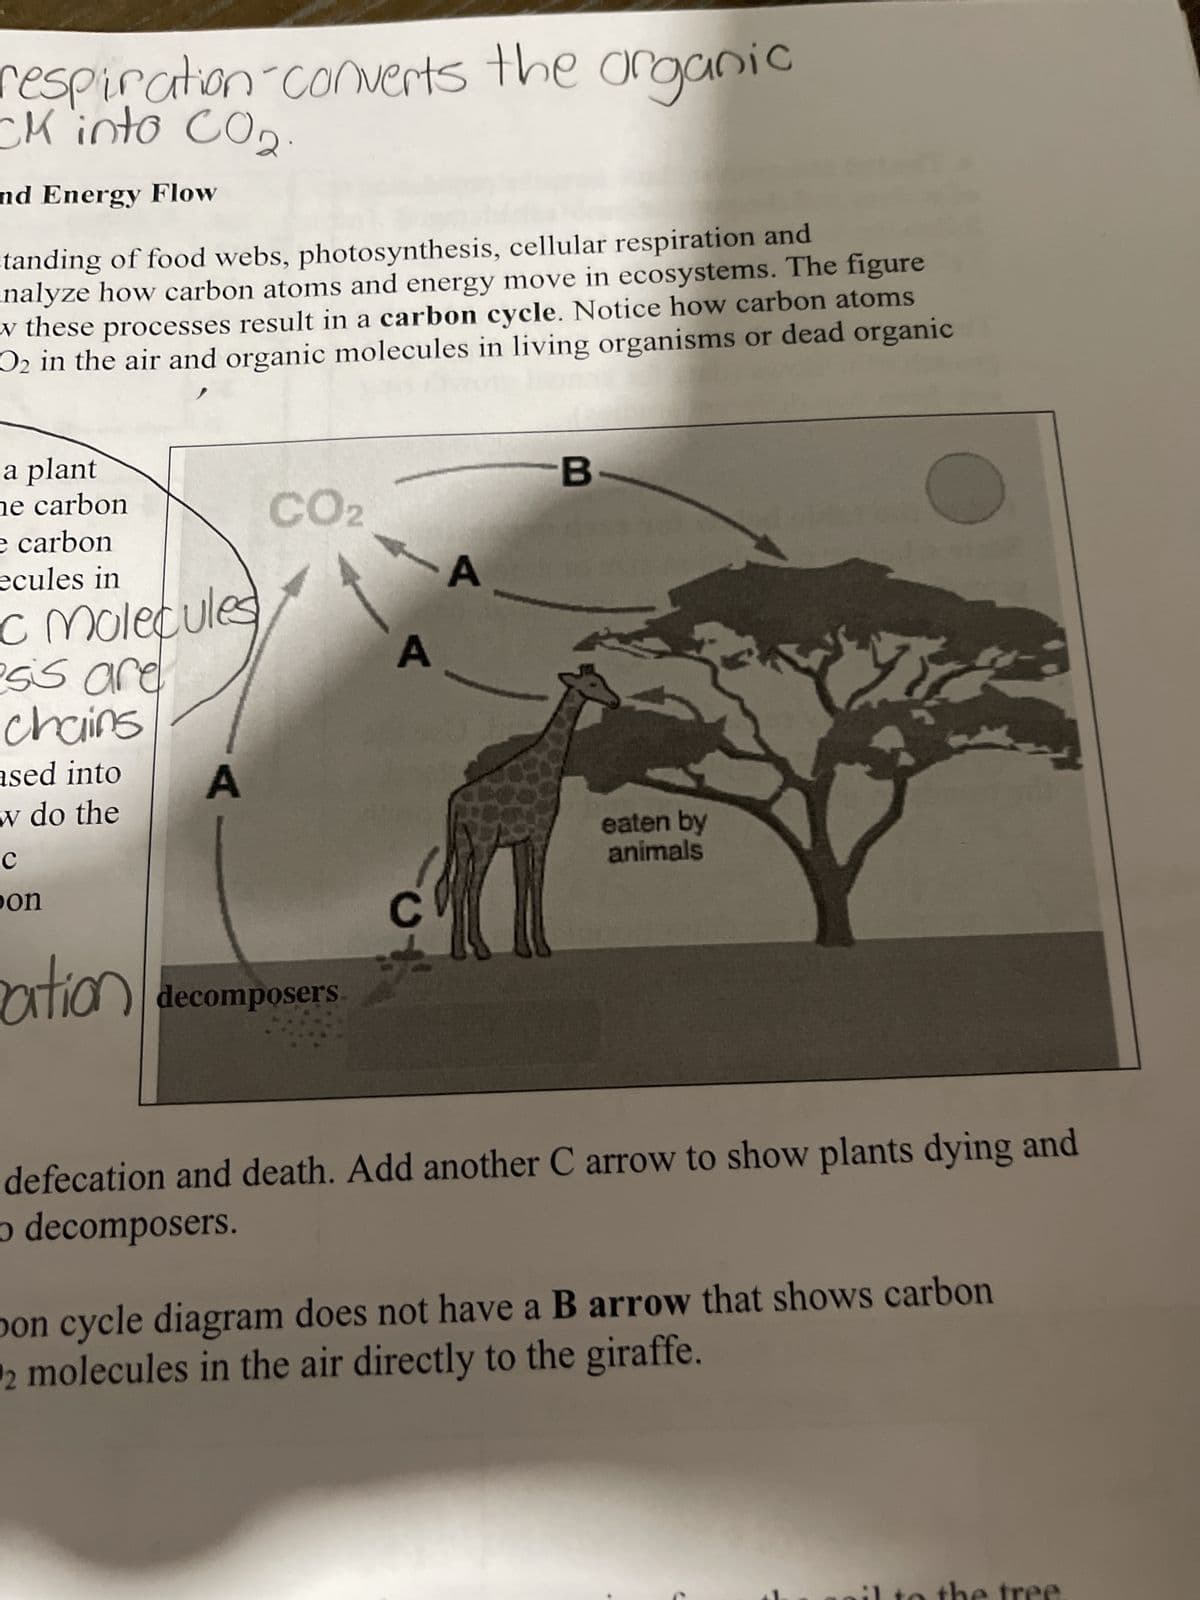 respiration converts the organic
CK into CO₂.
and Energy Flow
standing of food webs, photosynthesis, cellular respiration and
analyze how carbon atoms and energy move in ecosystems. The figure
w these processes result in a carbon cycle. Notice how carbon atoms
D2 in the air and organic molecules in living organisms or dead organic
a plant
he carbon
e carbon
ecules in
C molecules
esis are
chains
ased into
w do the
с
on
ration
CO₂
decomposers
A
B
eaten by
animals
defecation and death. Add another C arrow to show plants dying and
o decomposers.
bon cycle diagram does not have a B arrow that shows carbon
2 molecules in the air directly to the giraffe.
tree